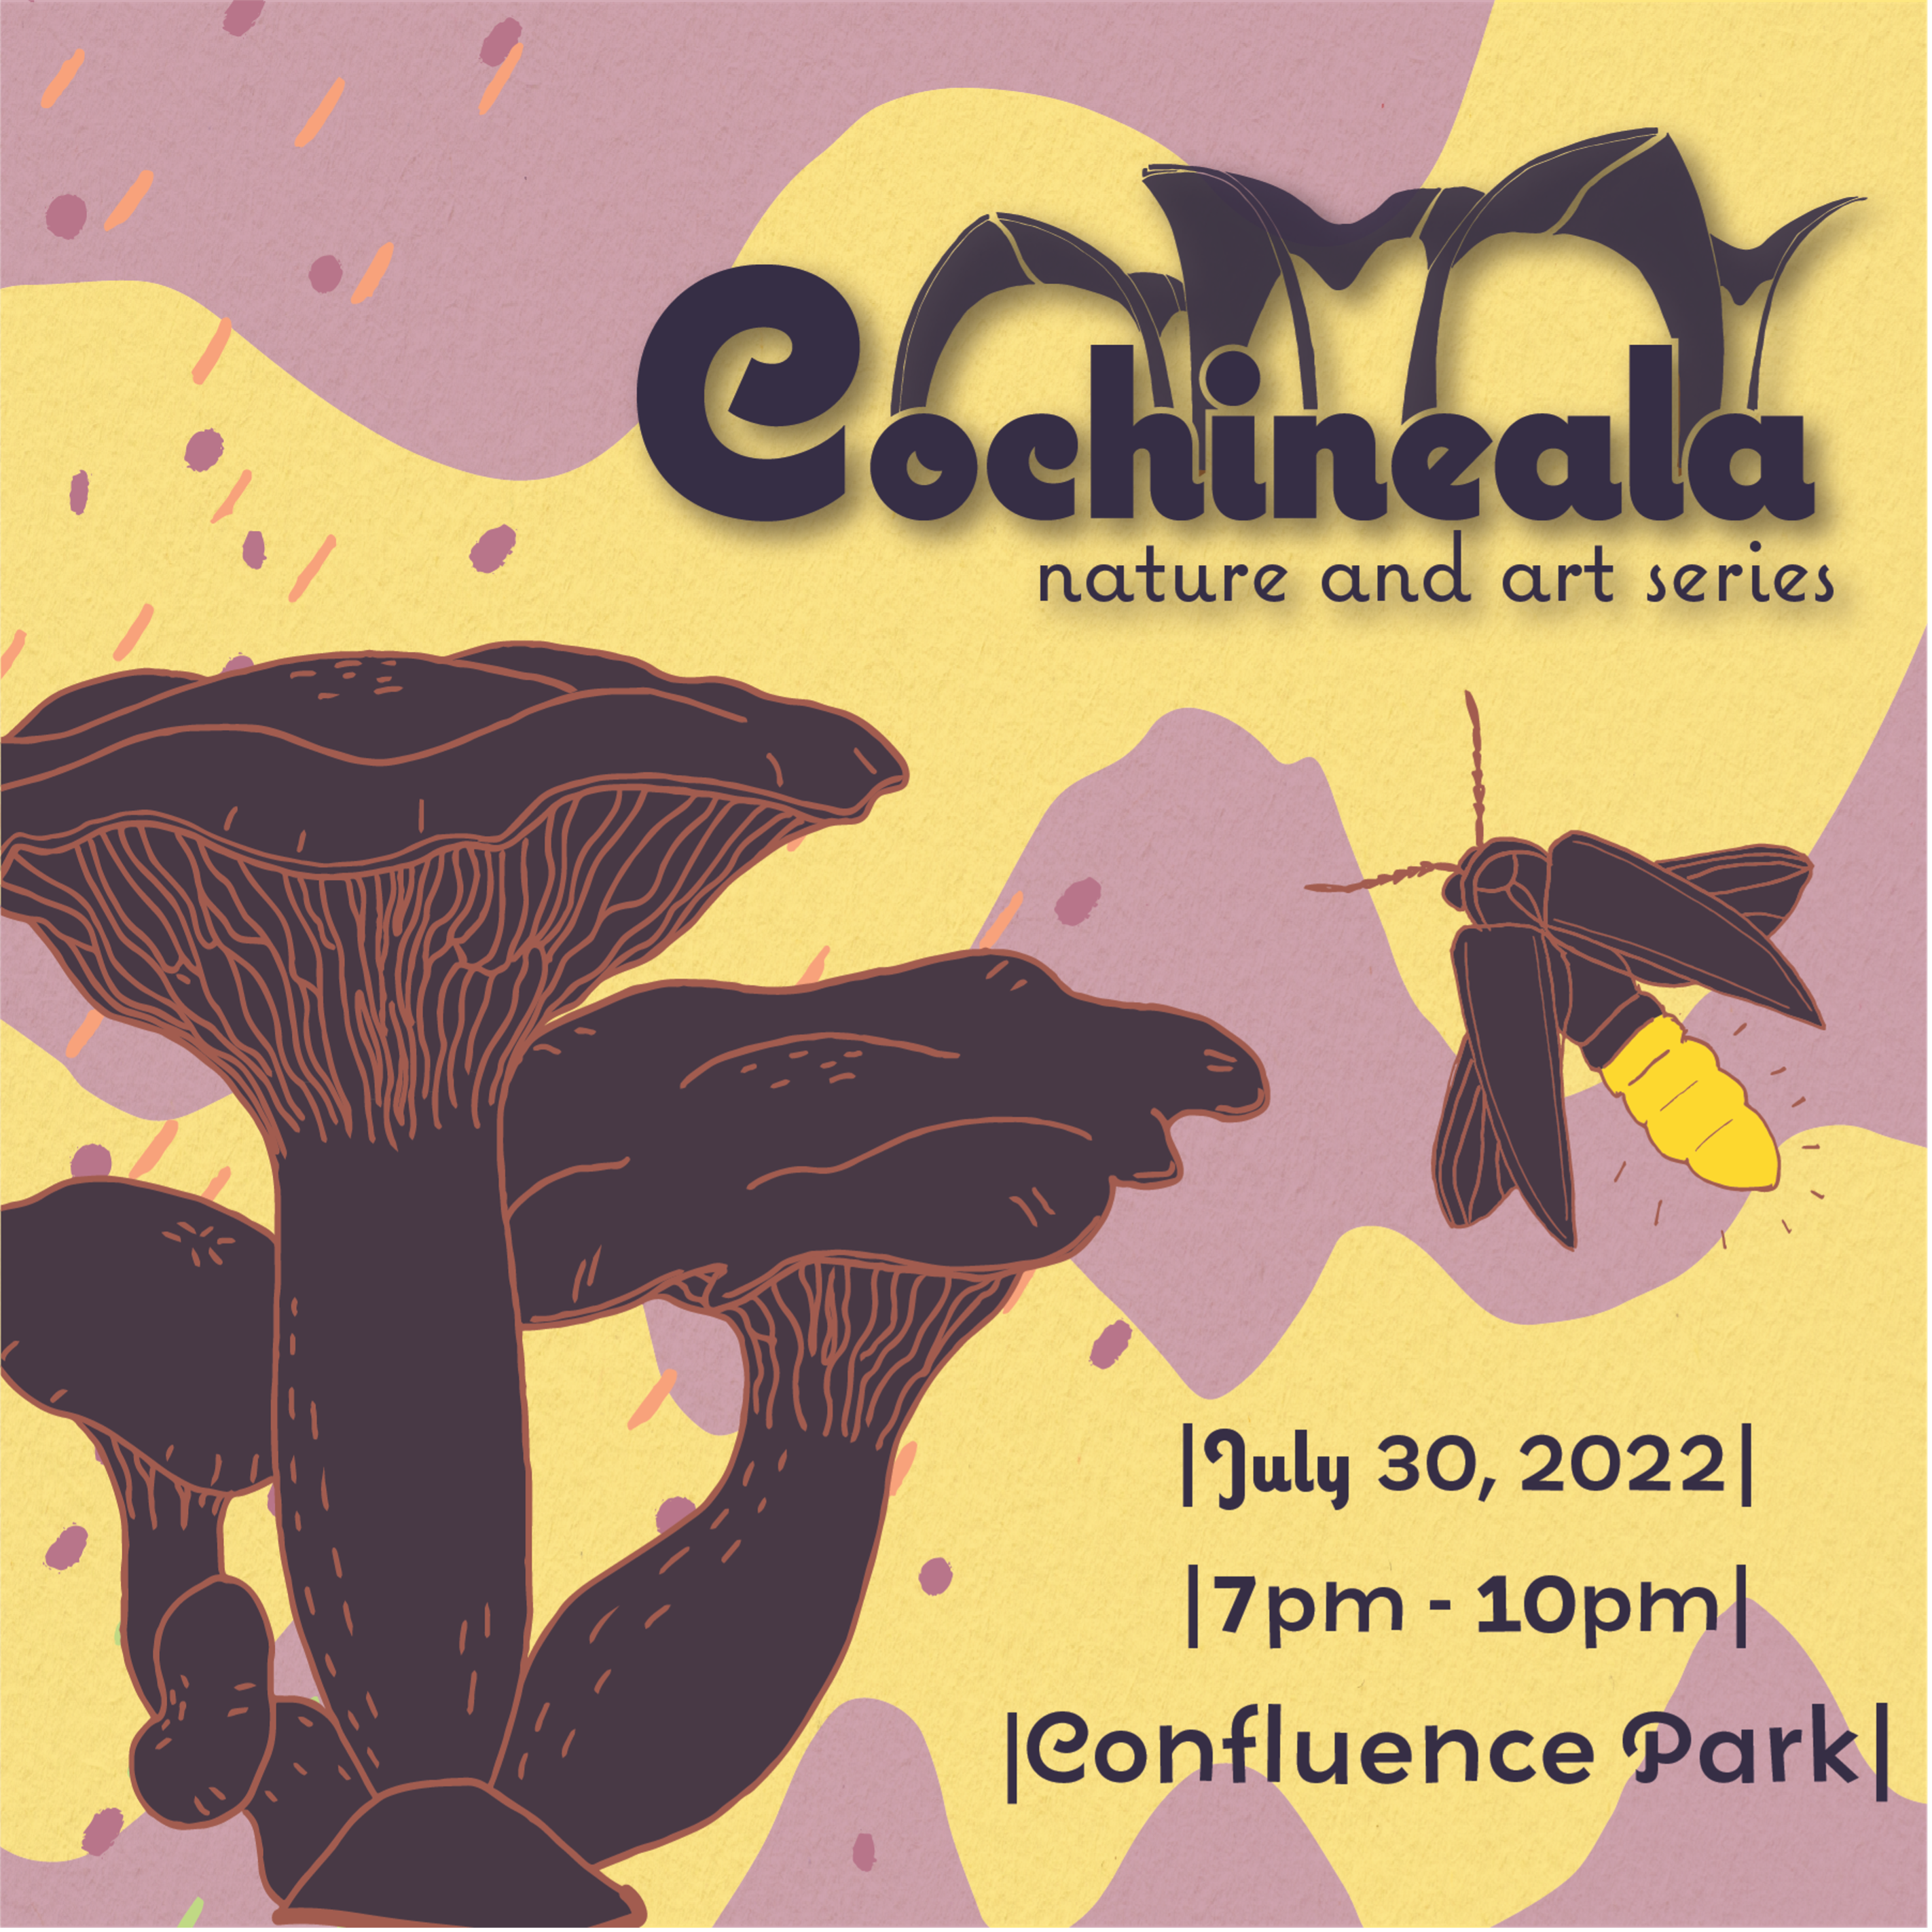 Cochineala Nature and Art Series continues! July 30 at Confluence Park from 7PM-10PM.